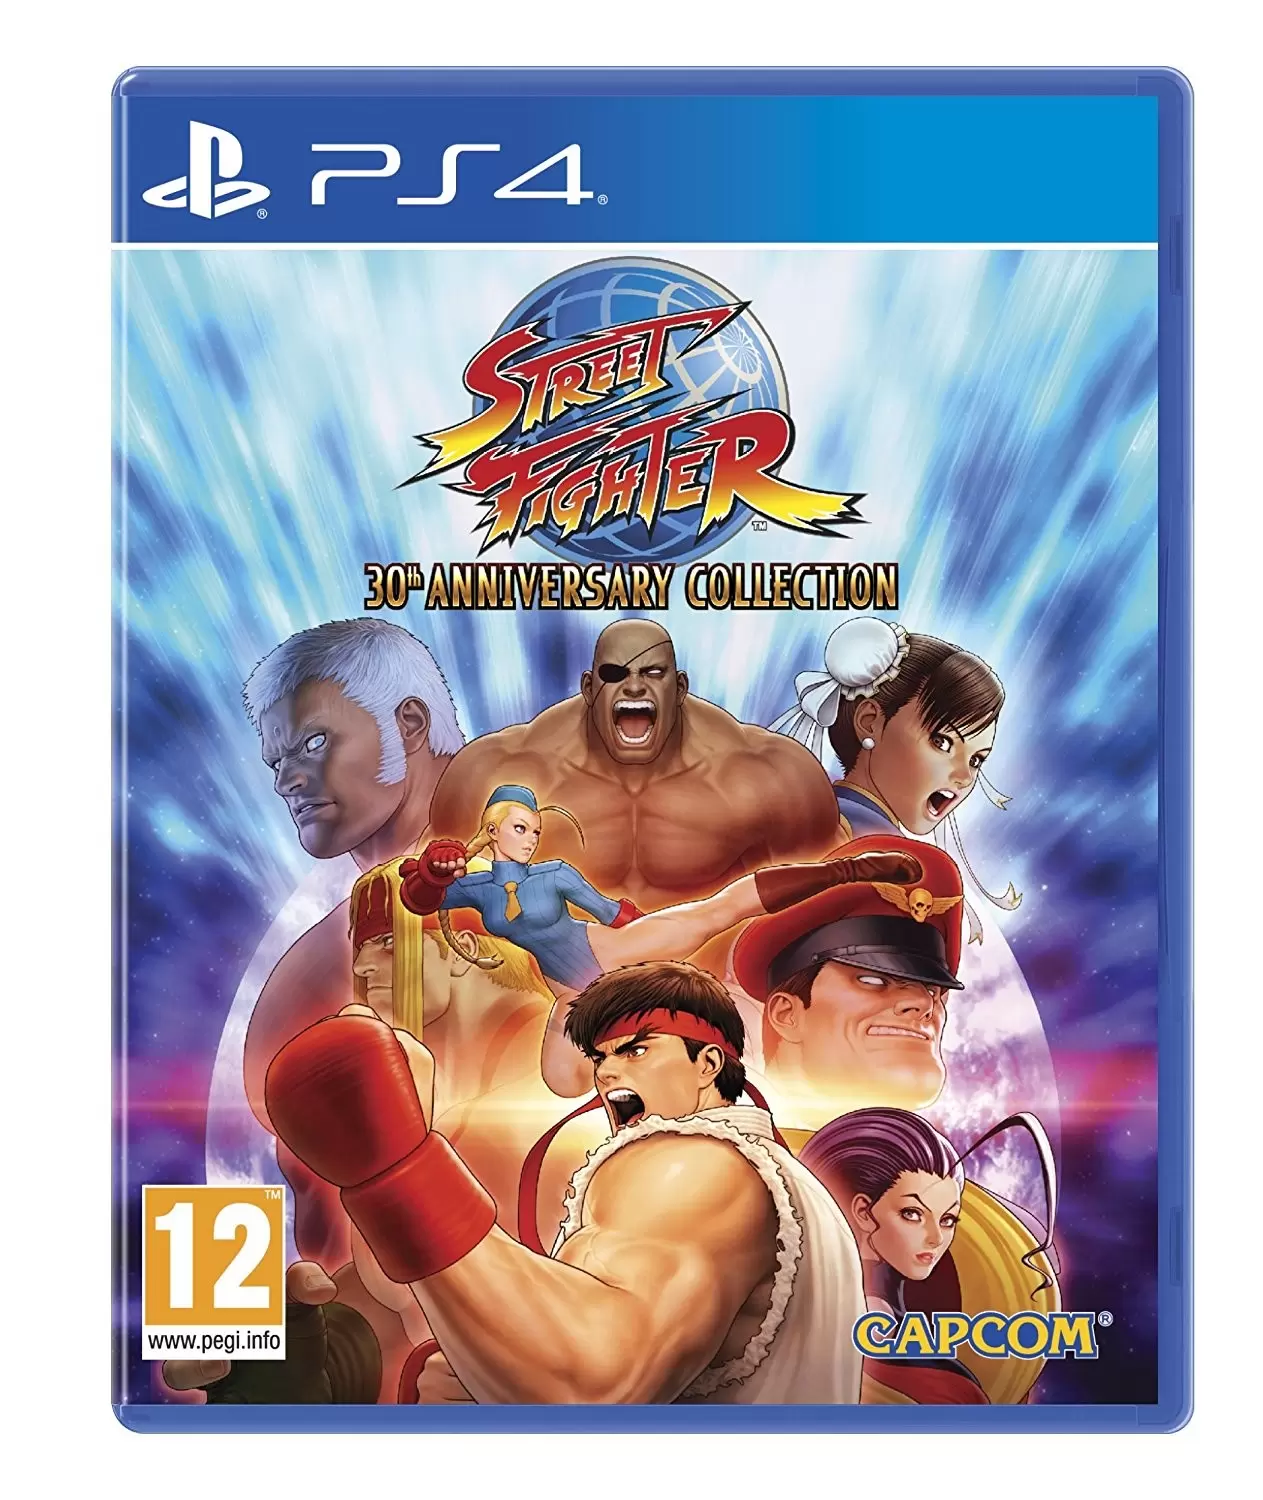 PS4 Games - Street Fighter 30th Anniversary Collection